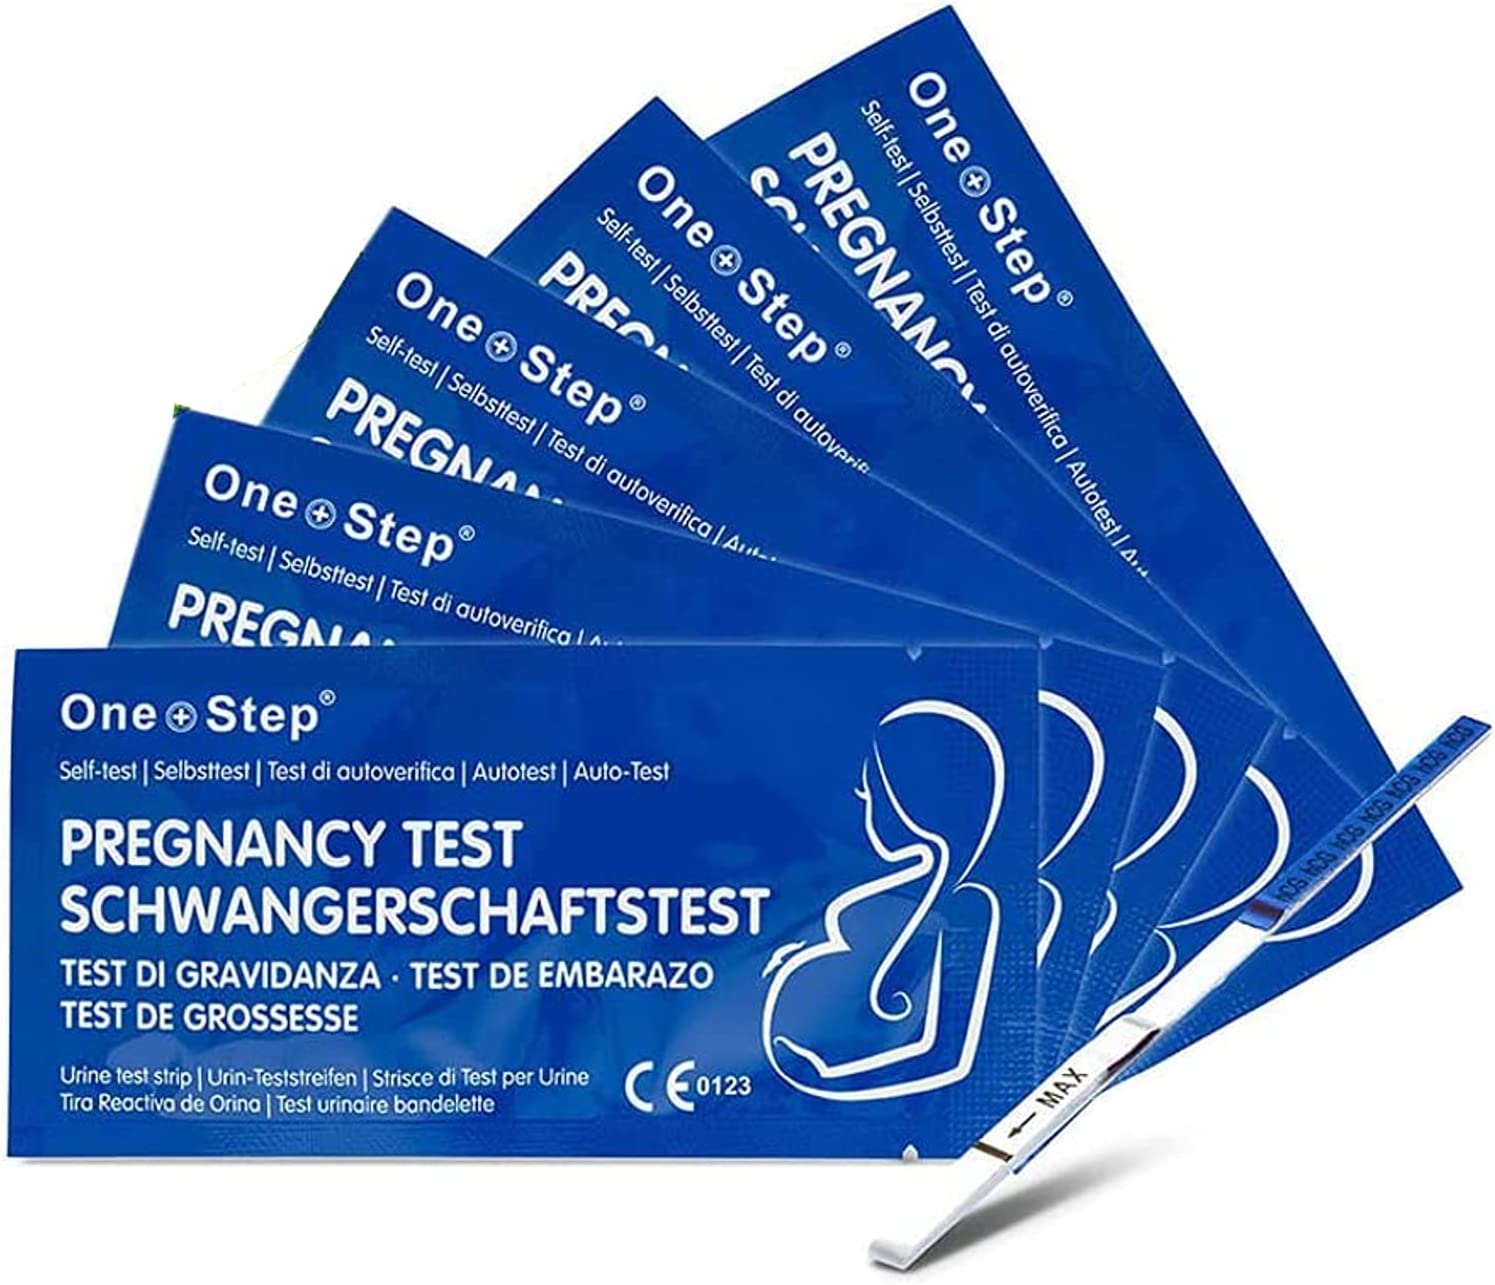 One Step: 20 x Highly Sensitive 10mIU Pregnancy Test Strips RRP 2.99 CLEARANCE XL 1.99